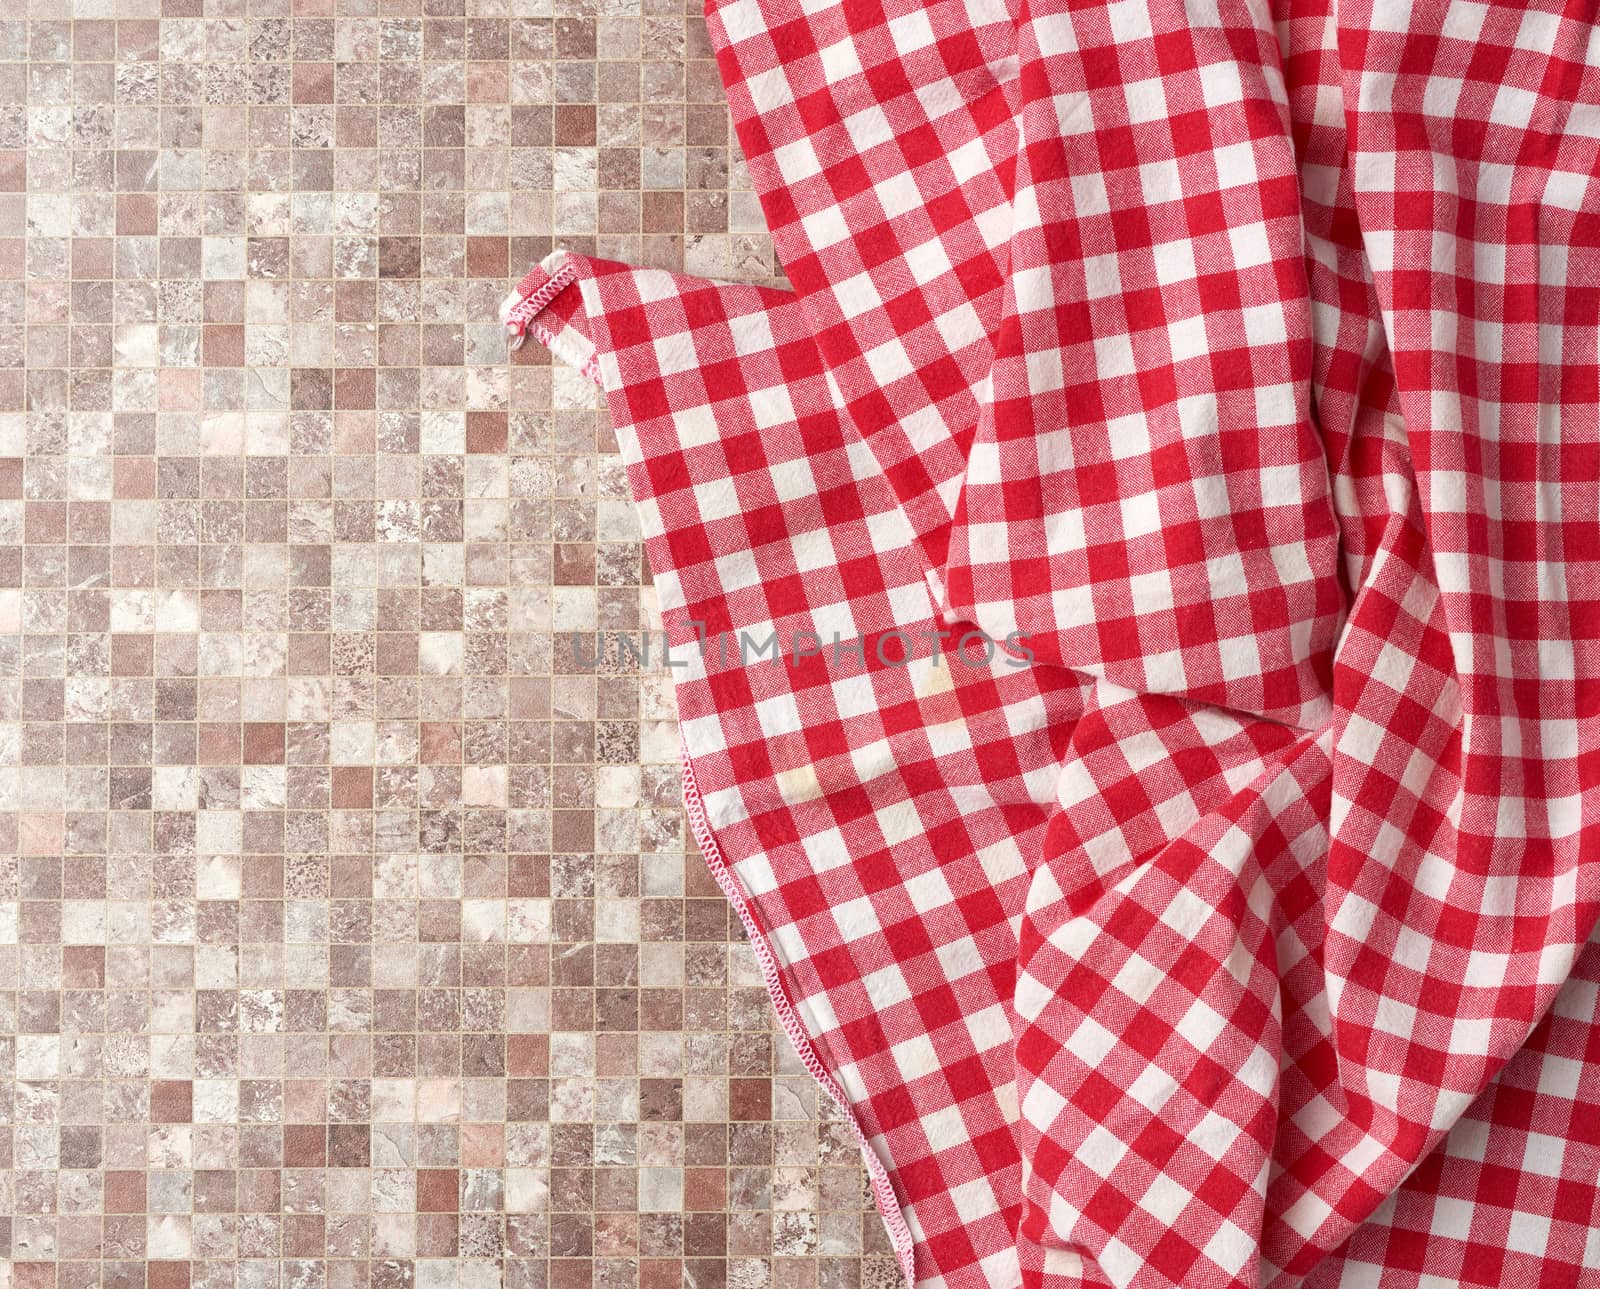 red checked cotton kitchen towel on a brown kitchen surface, top view, copy space